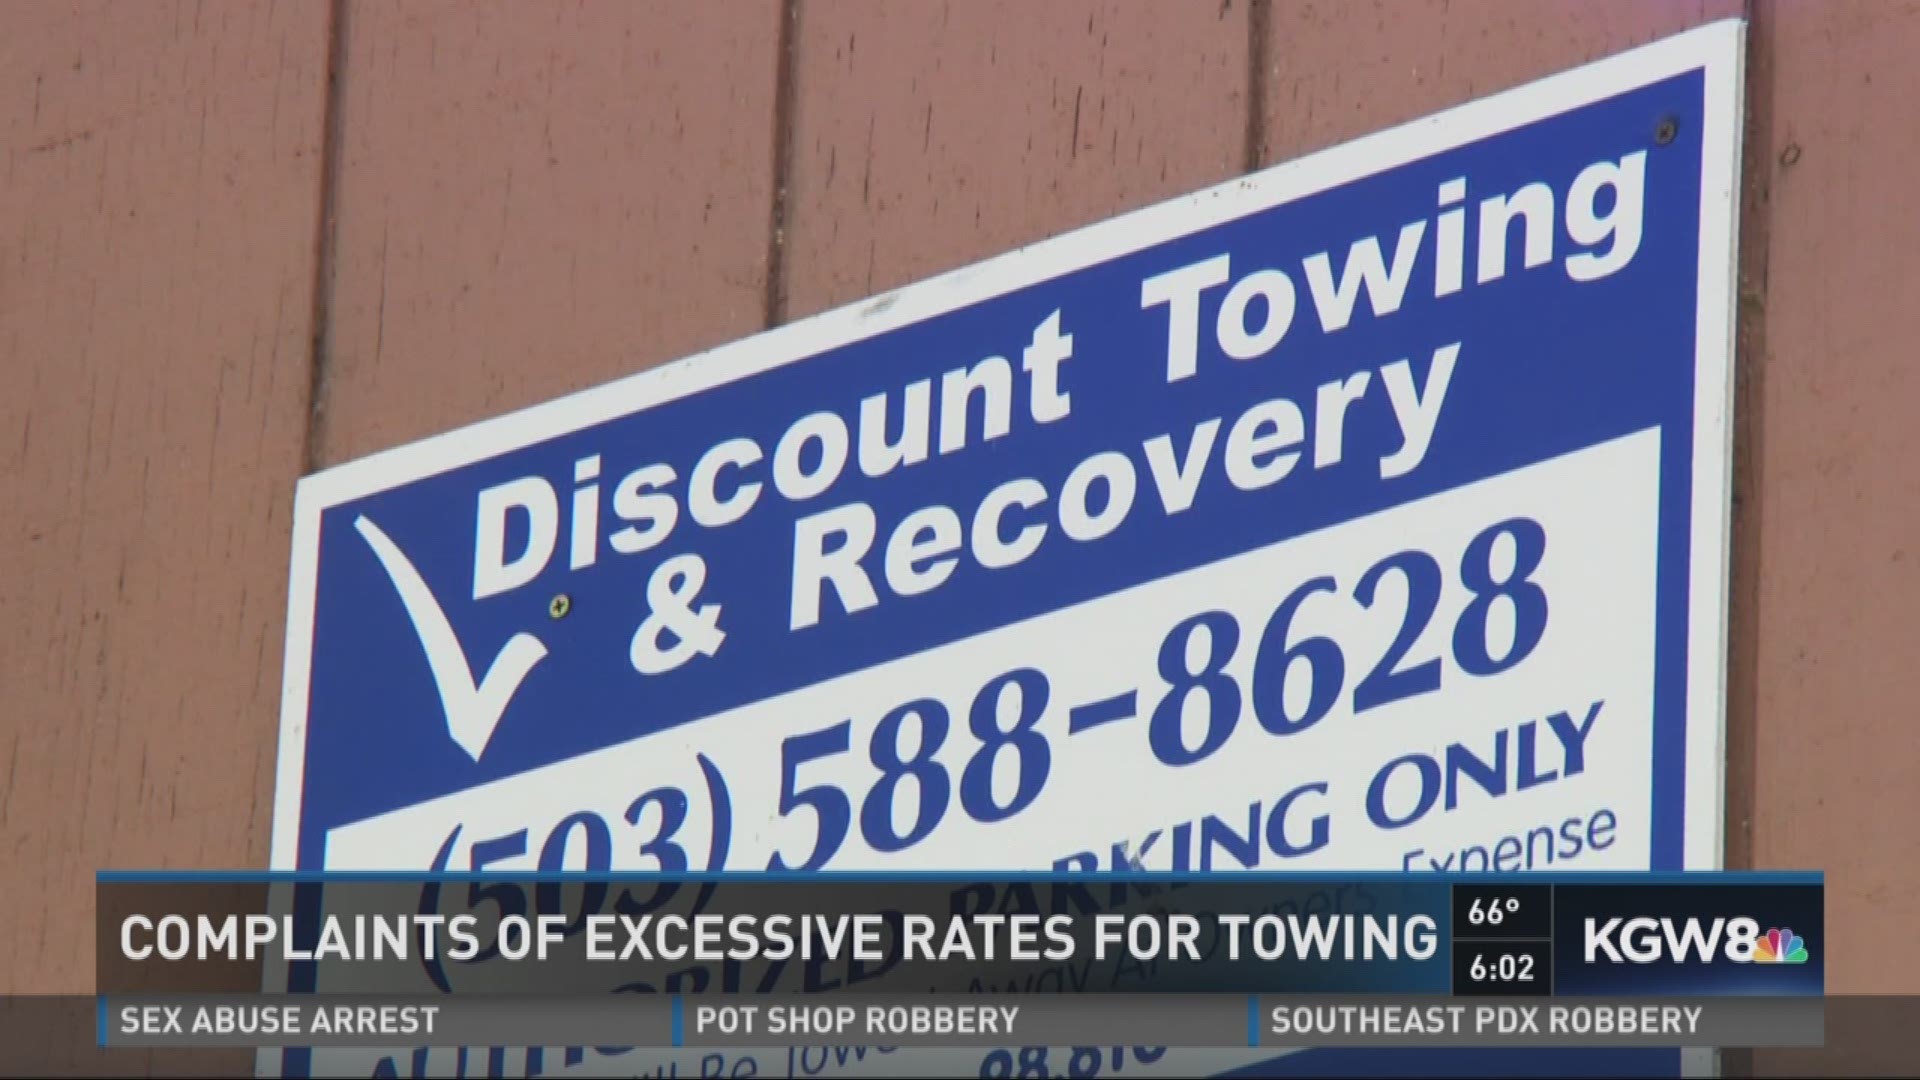 Complaints of excessive rates for towing